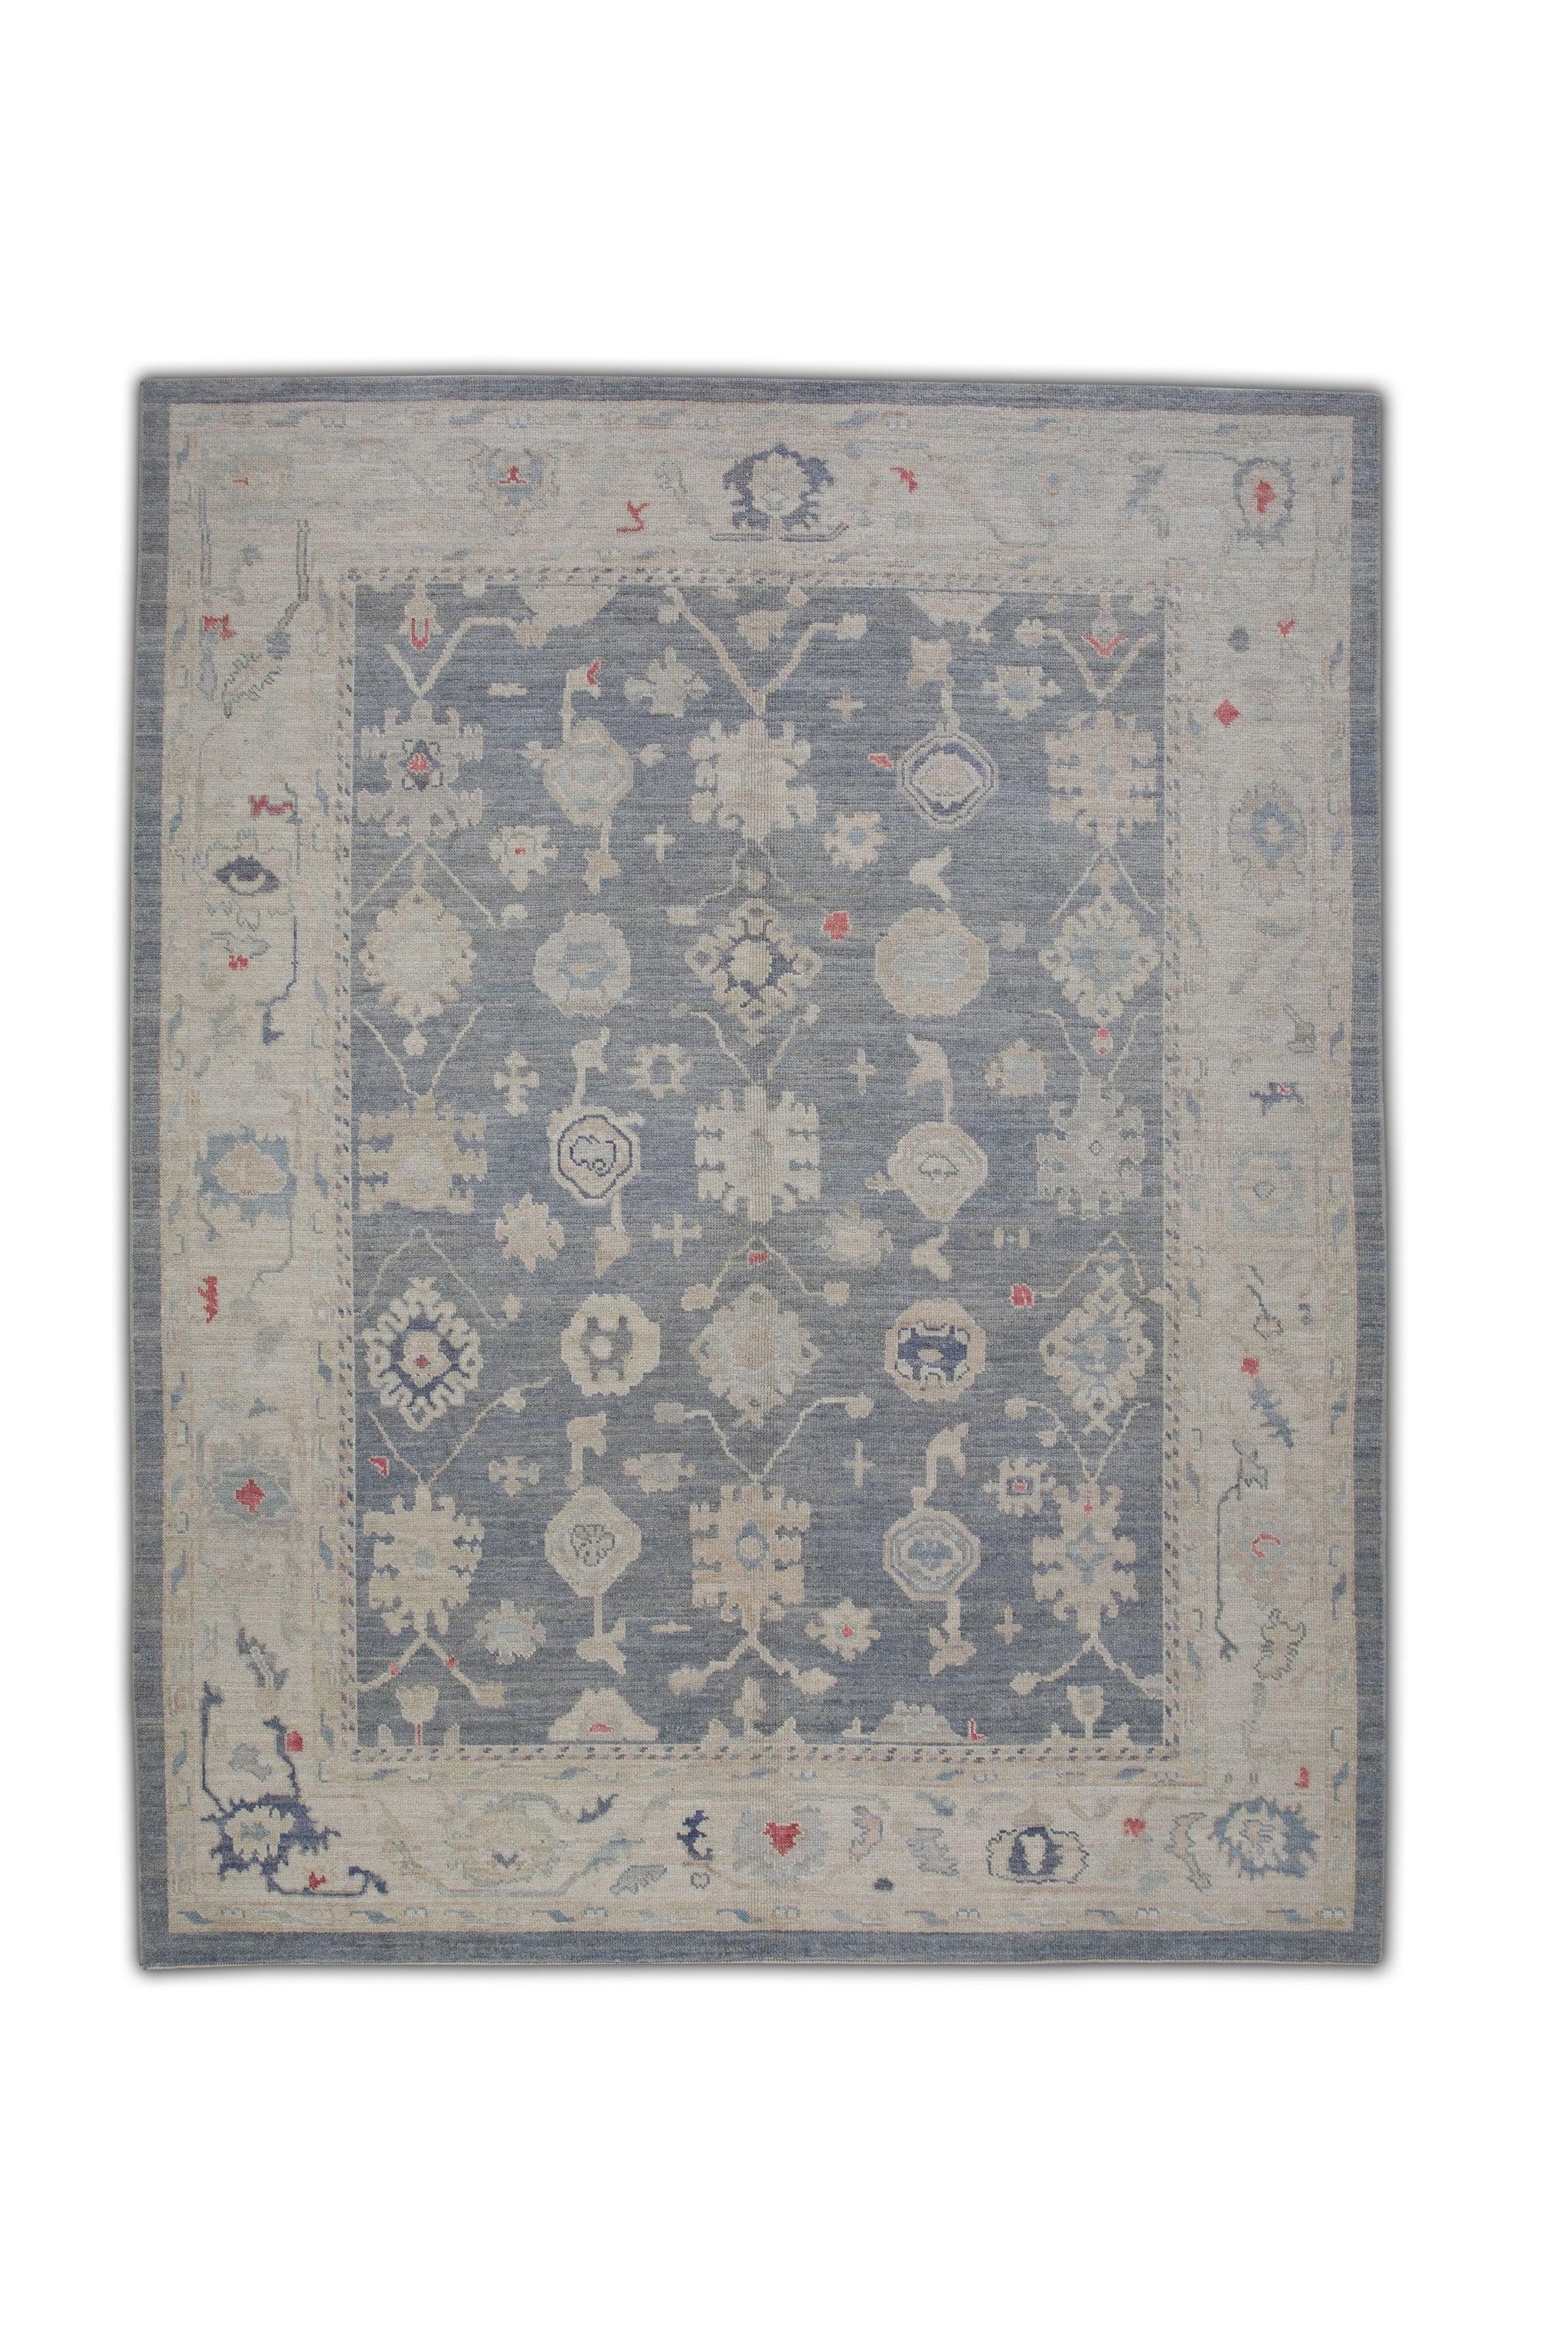 Handwoven Wool Floral Turkish Oushak Rug in Blue, Red, and Cream 8'4